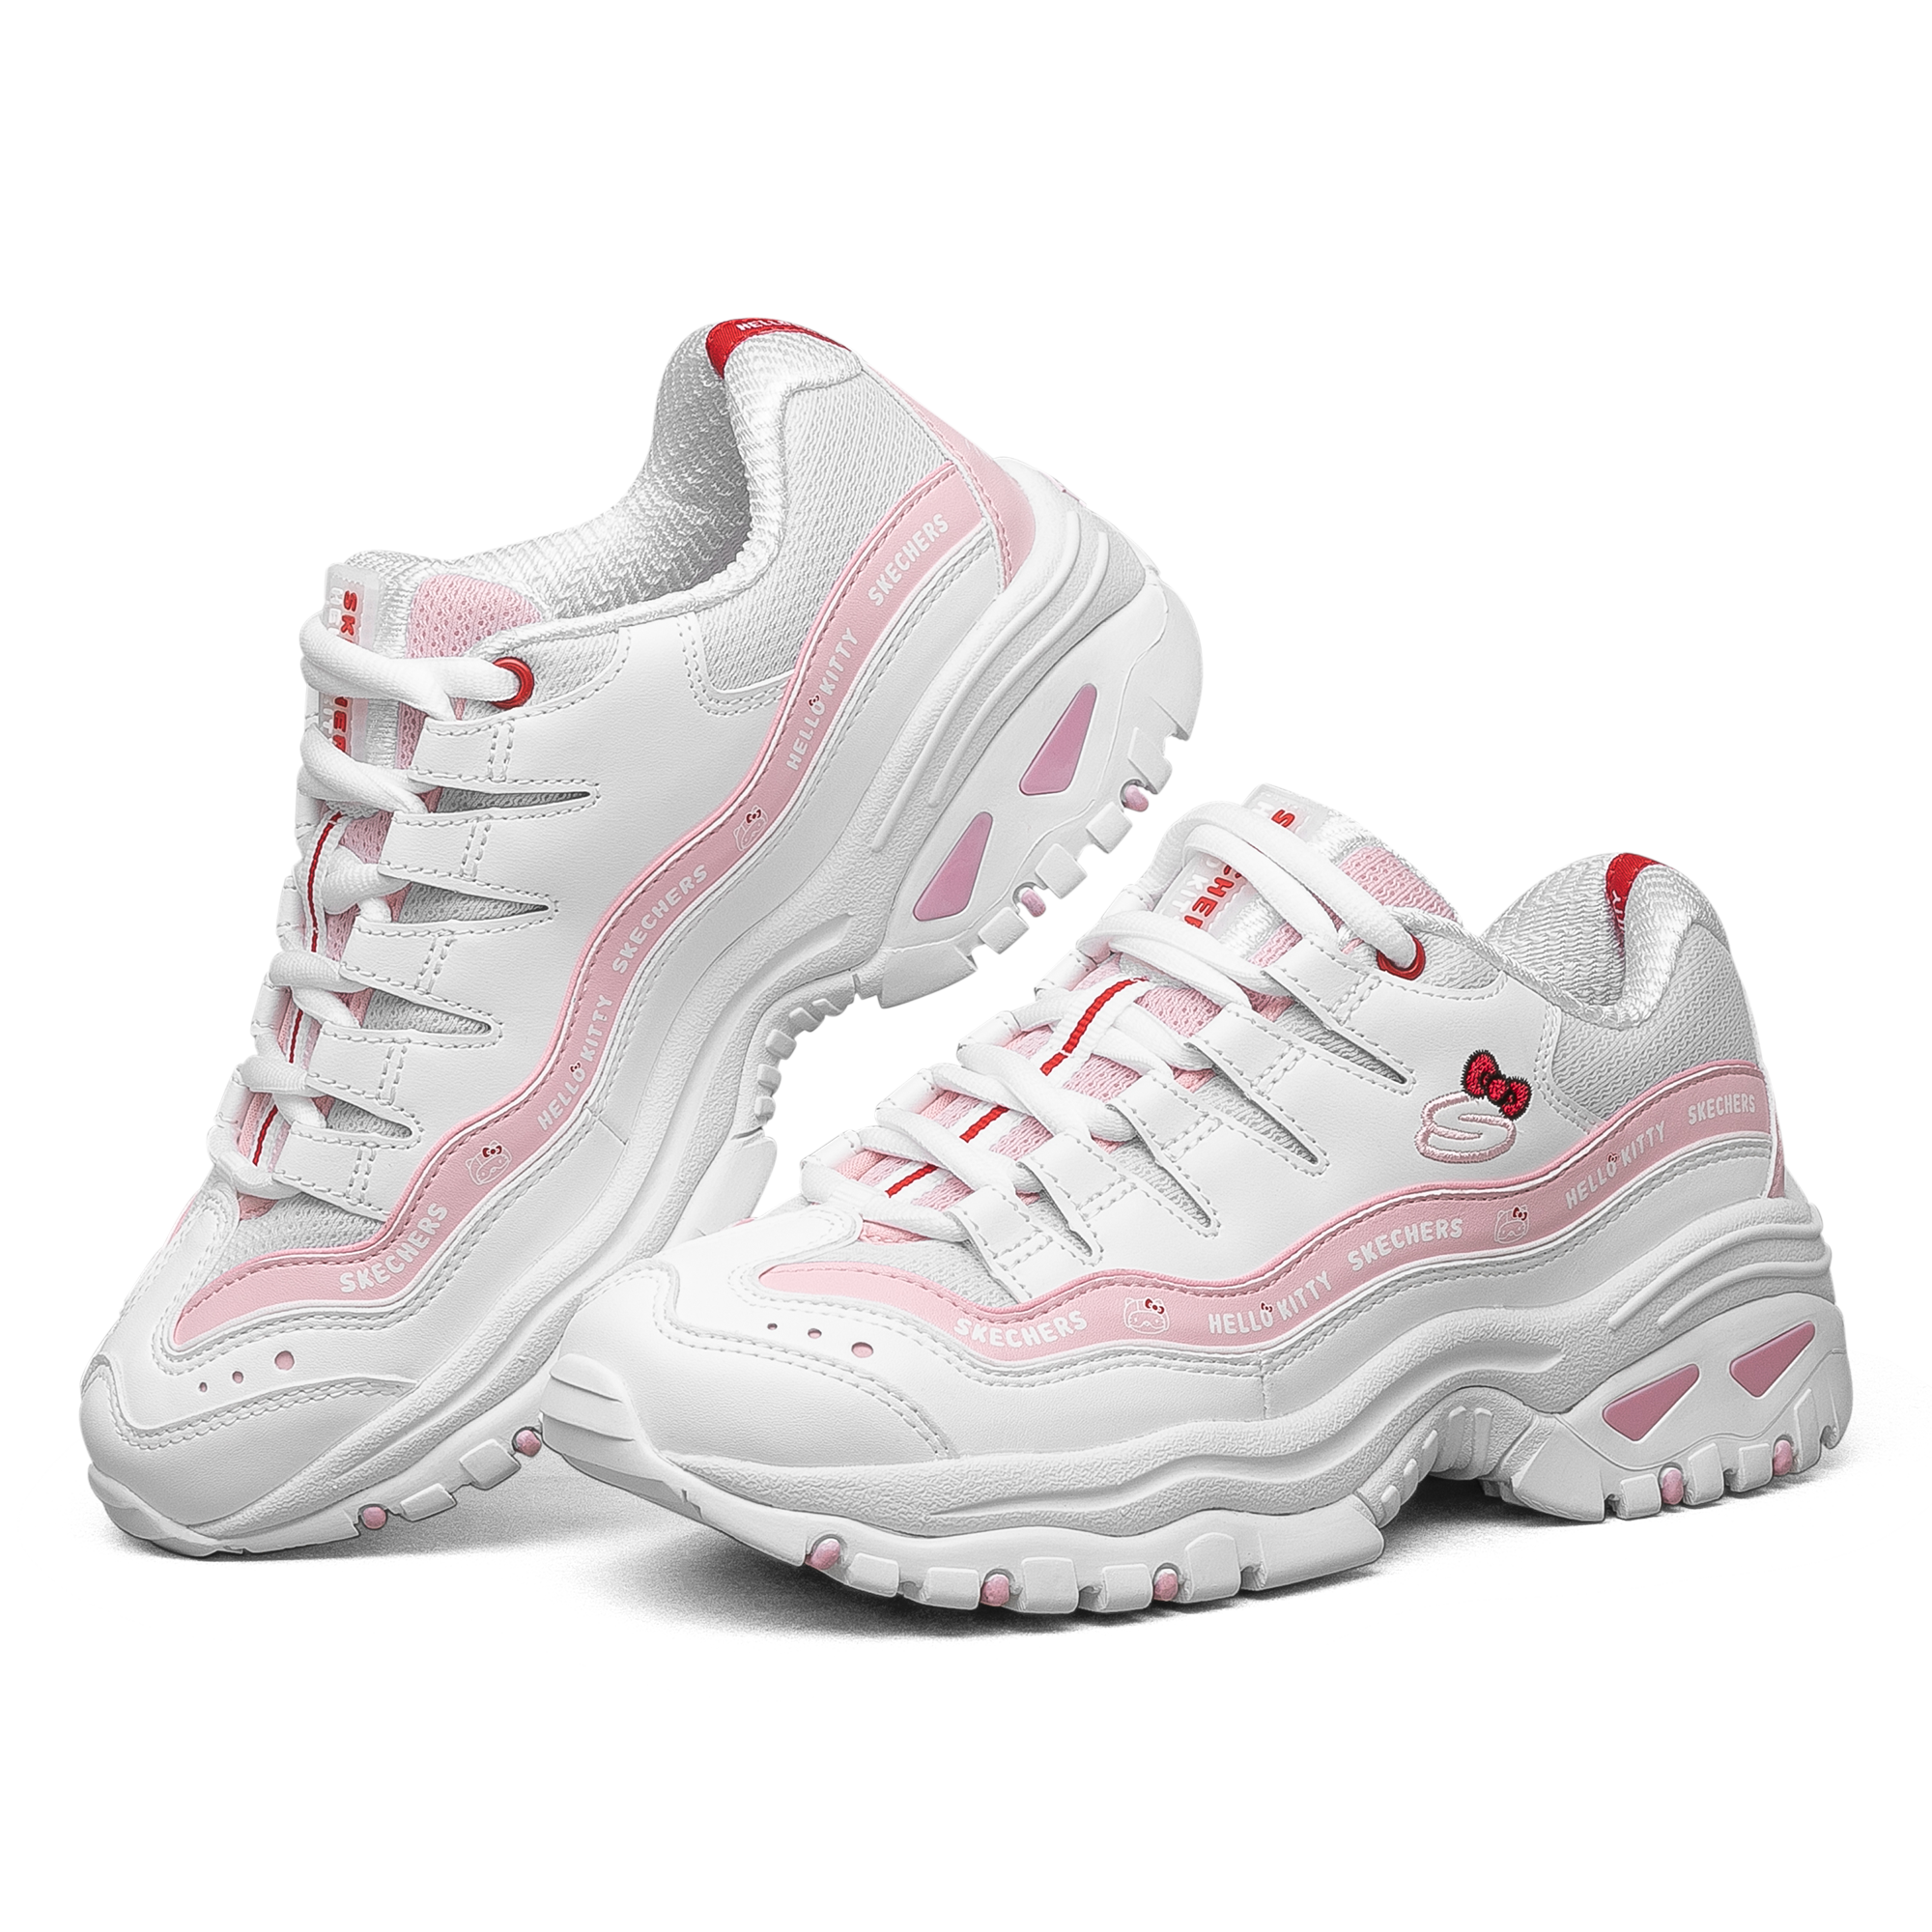 Skechers S'pore launches Hello Kitty collection, available in stores ...